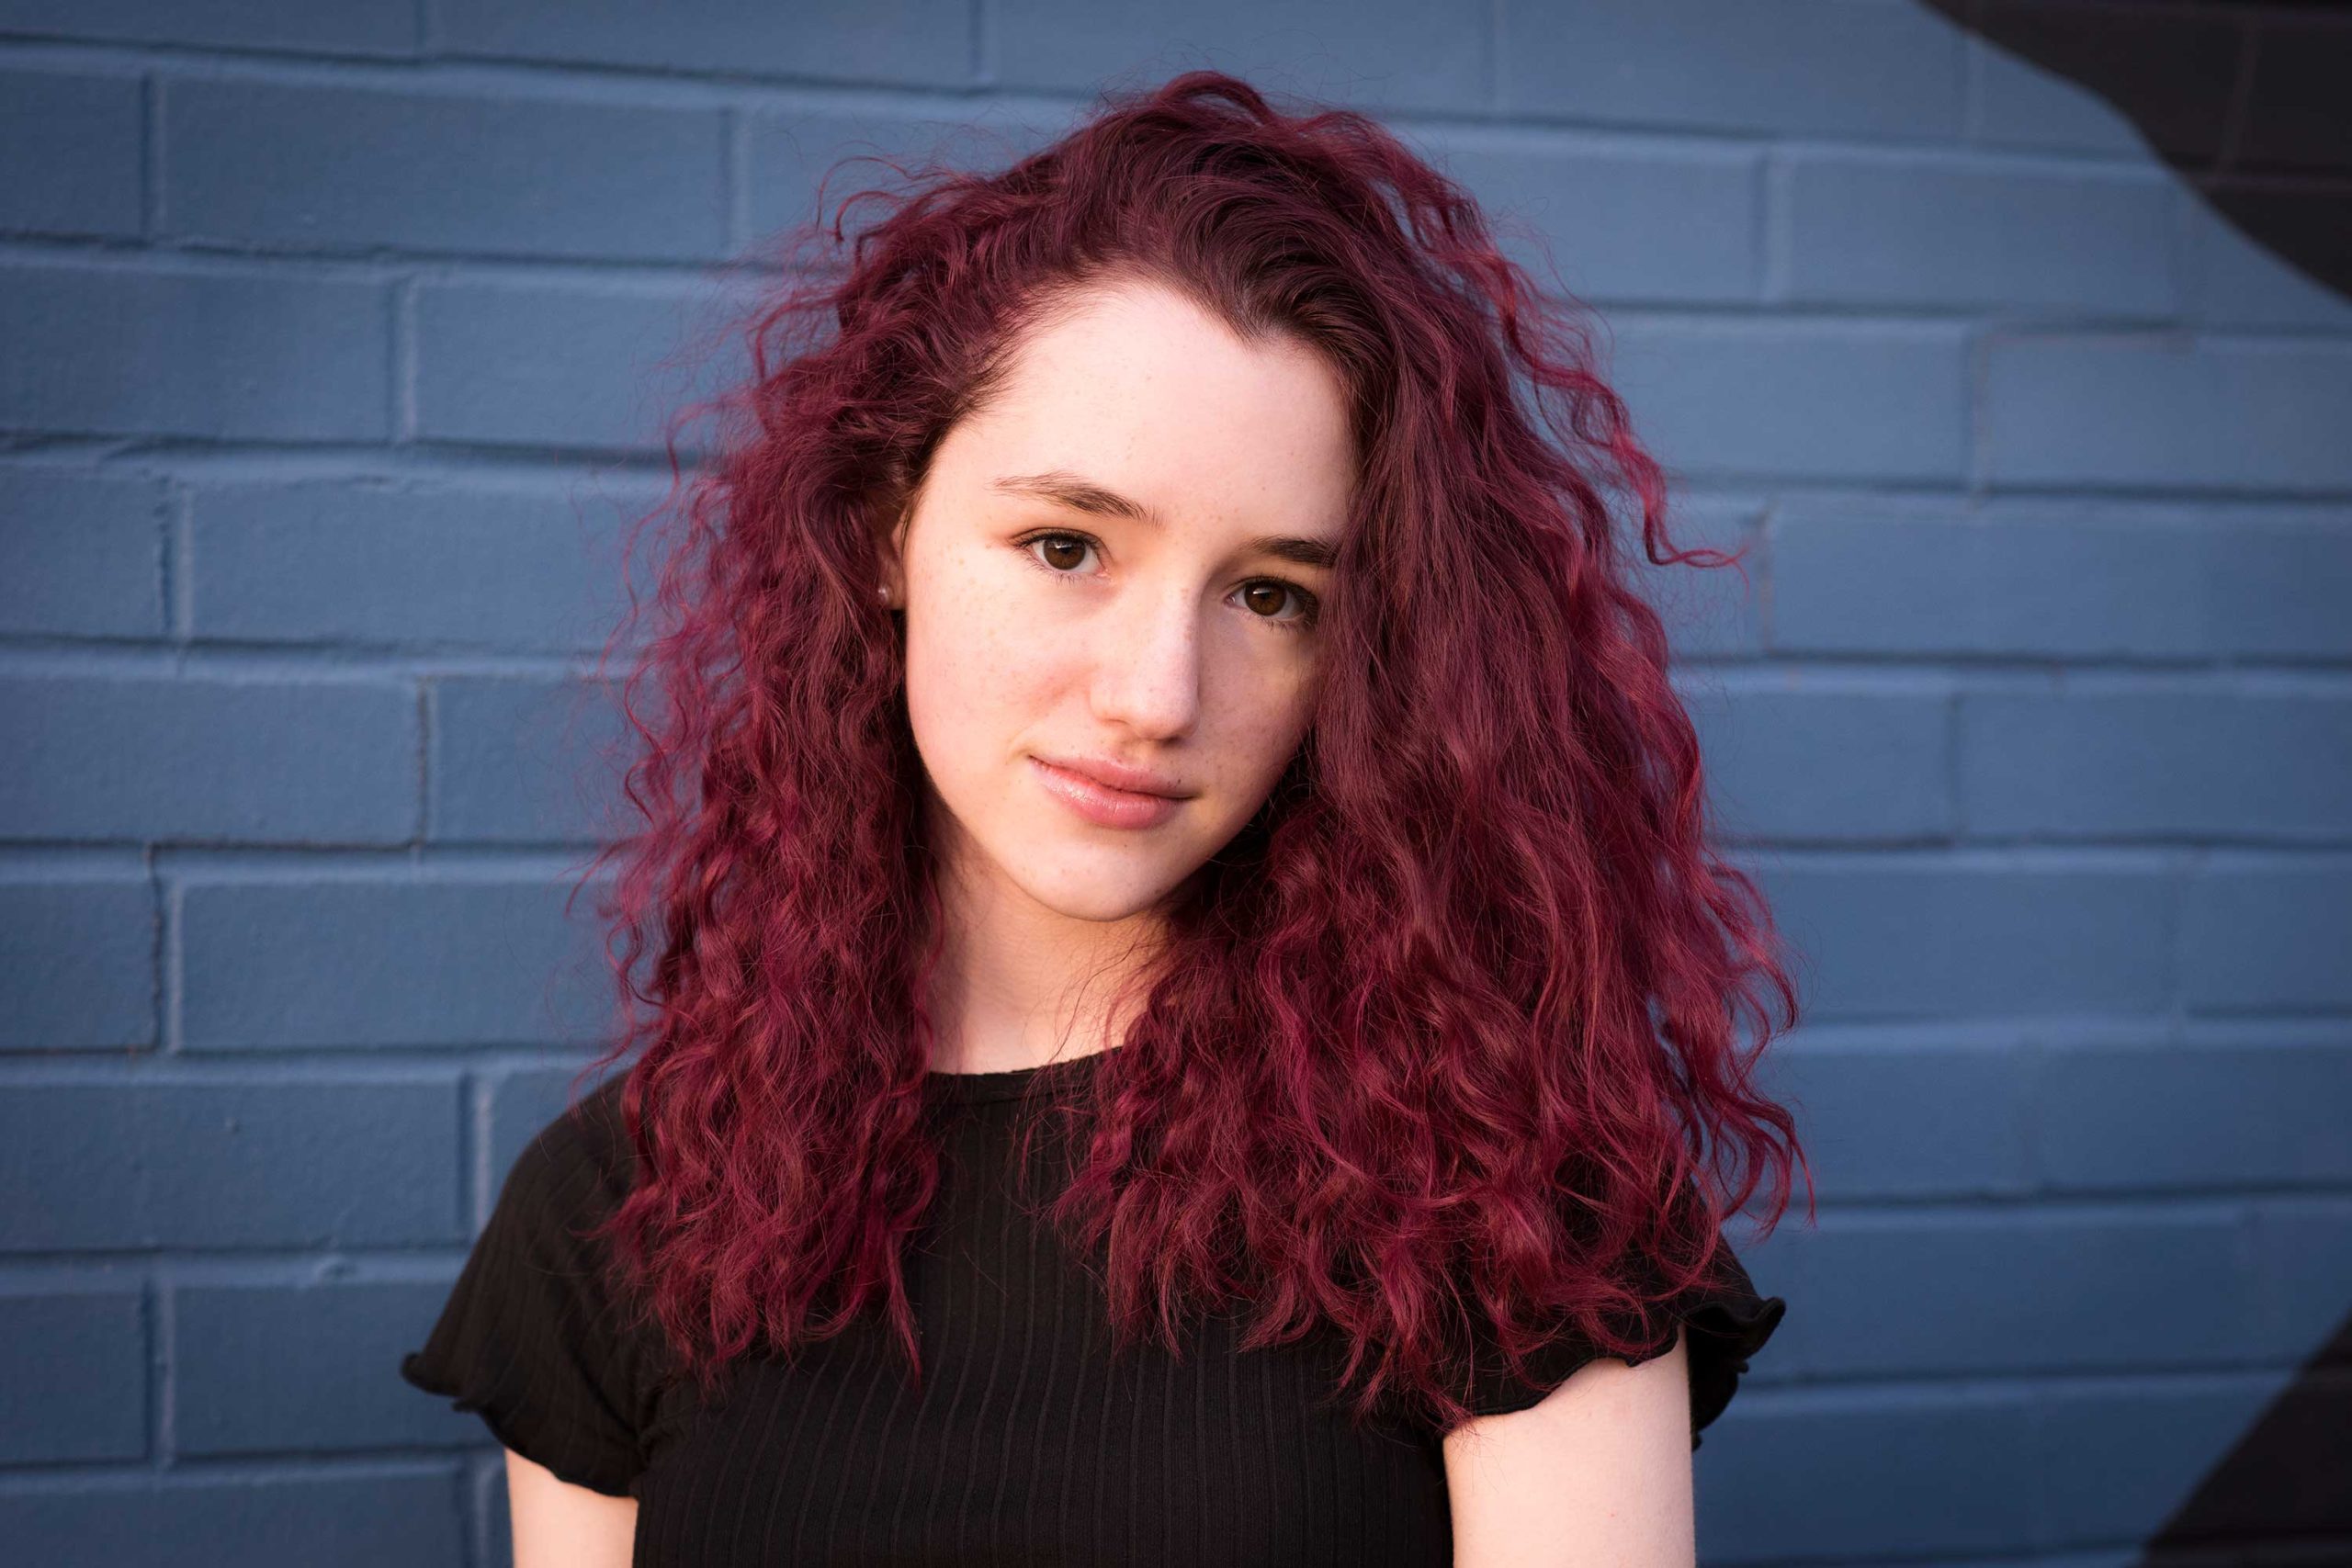 Teen girl with red colored hair against a blue graffiti wall.